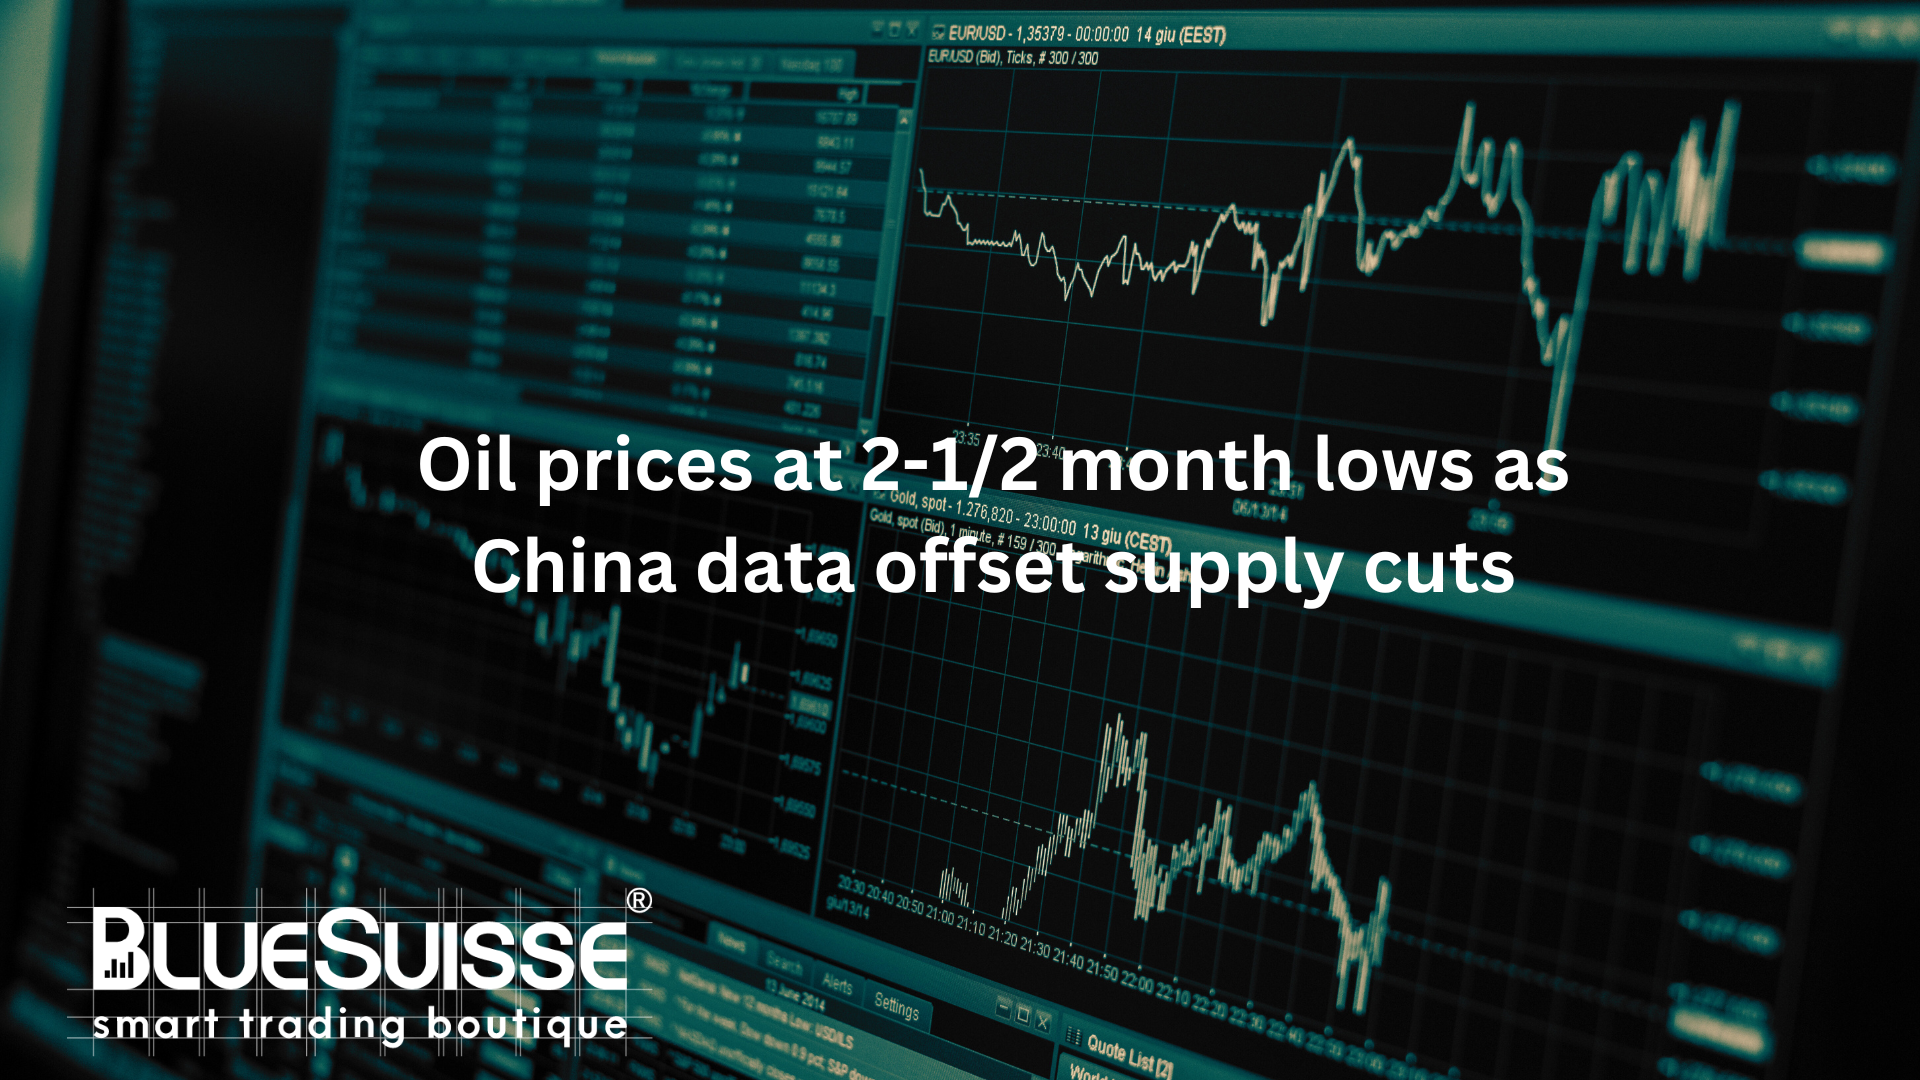 Oil prices at 2-1/2 month lows as China data offset supply cuts